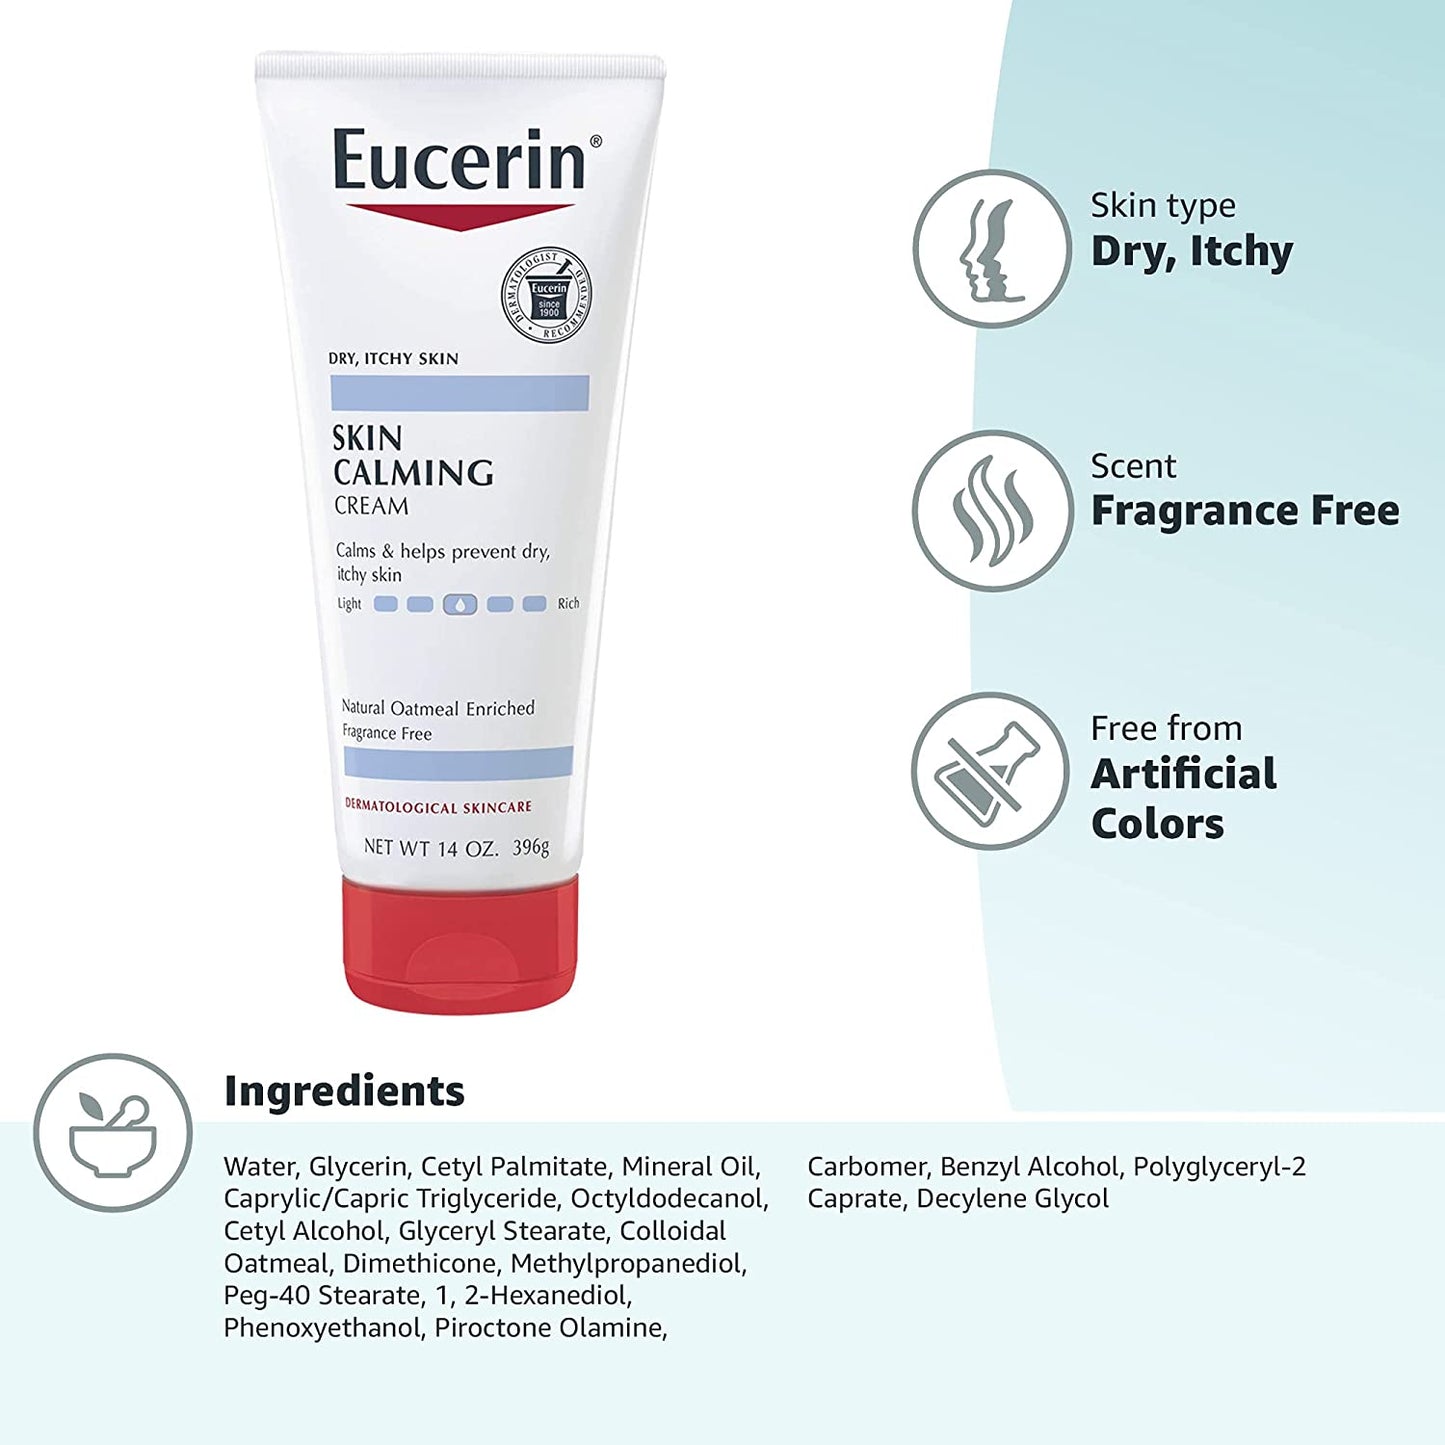 Eucerin Skin Calming Itch Soothing Cream Natural Oatmeal Enriched 14 oz. / 396g